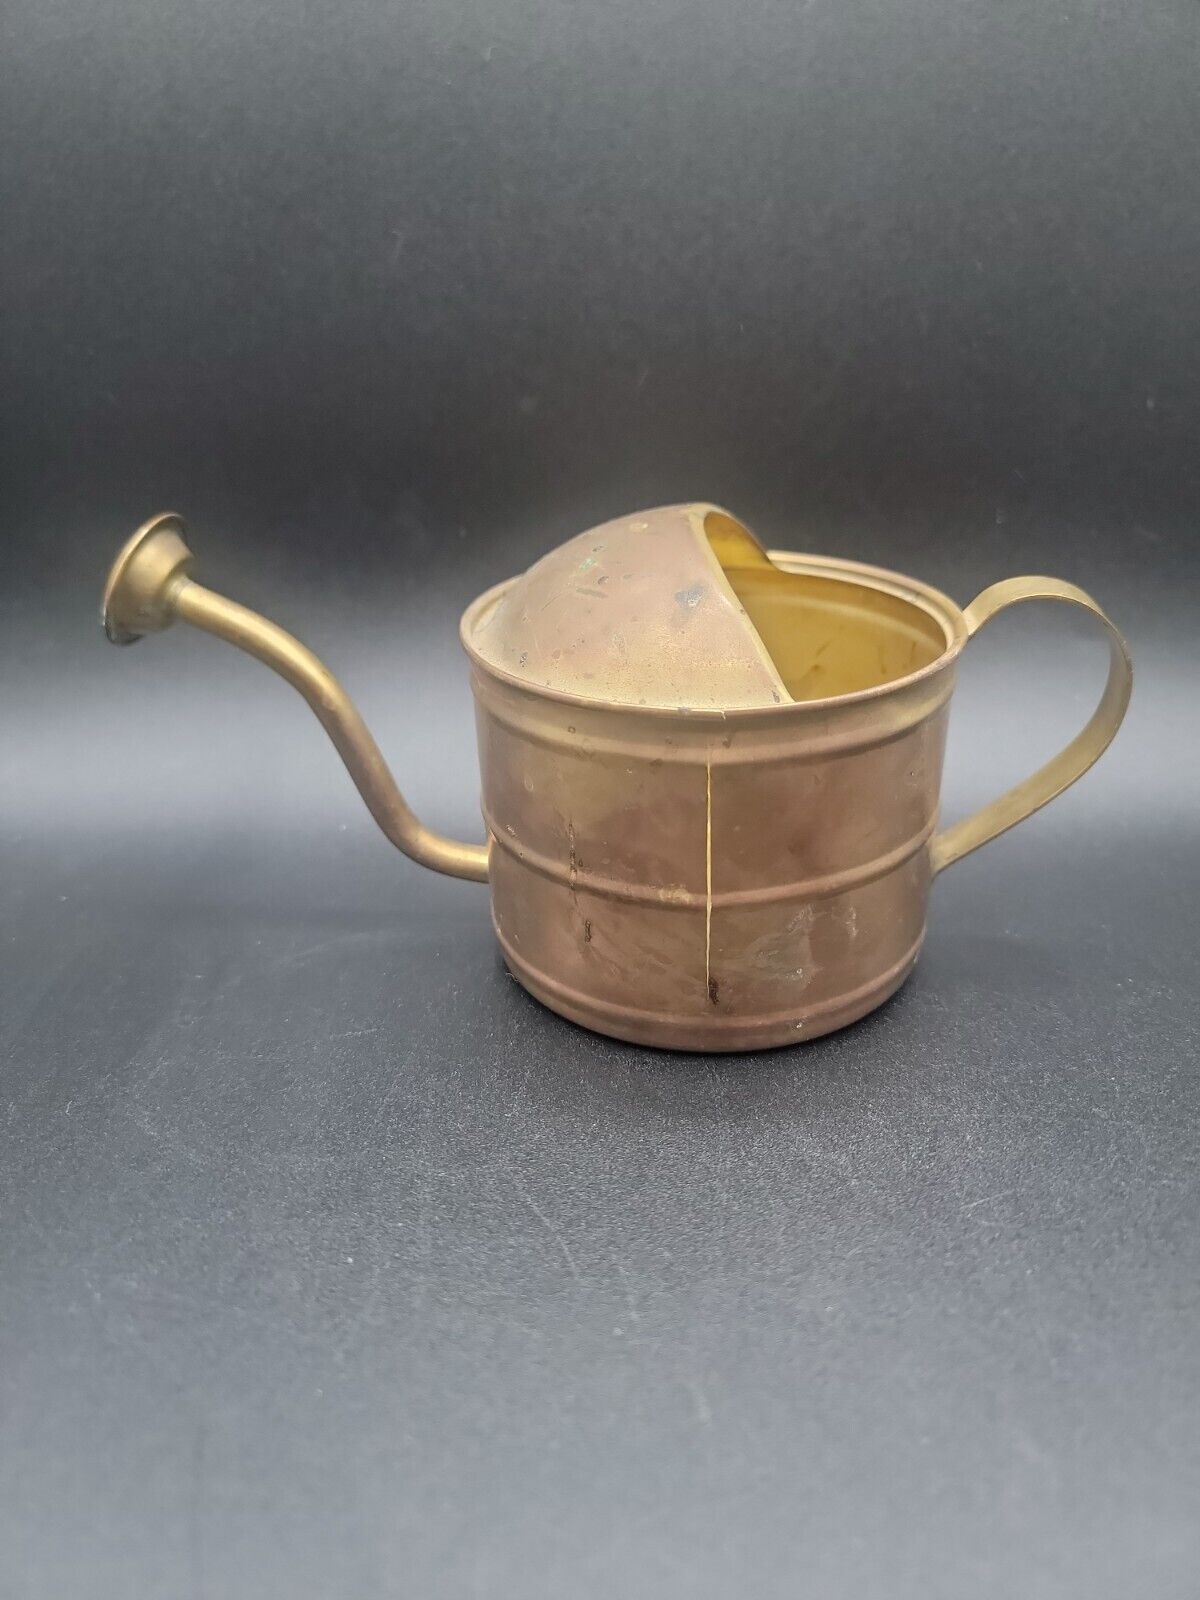 Vintage Small Brass Watering Can Hong Kong Has Patina Use for Plants or Decor